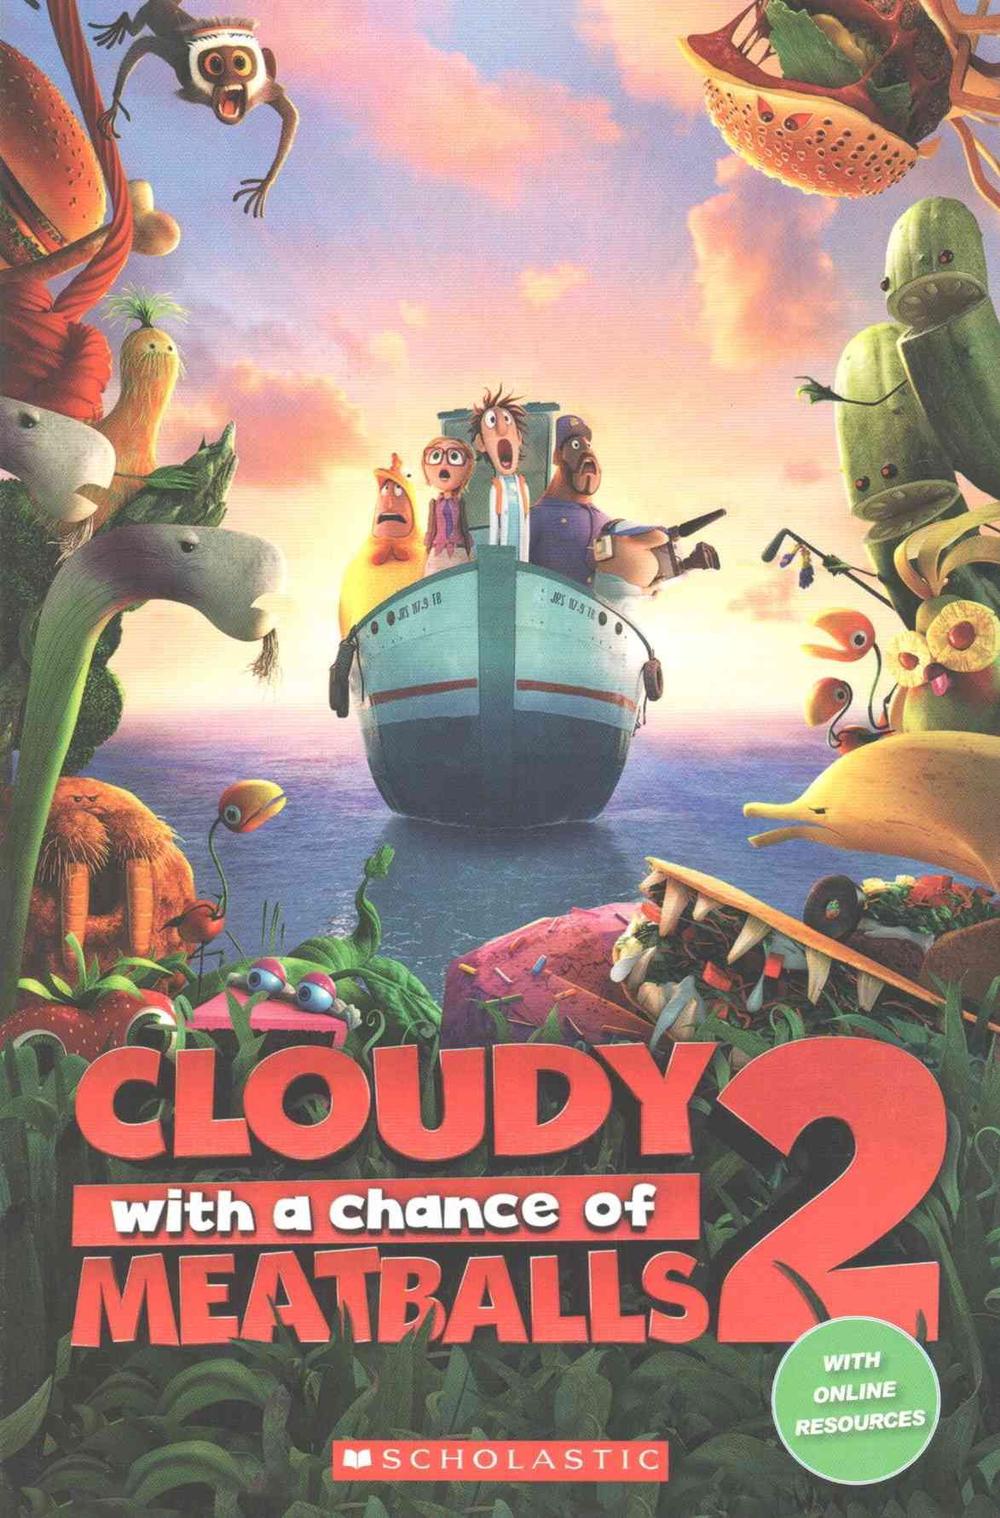 cloudy of a chance of meatballs book